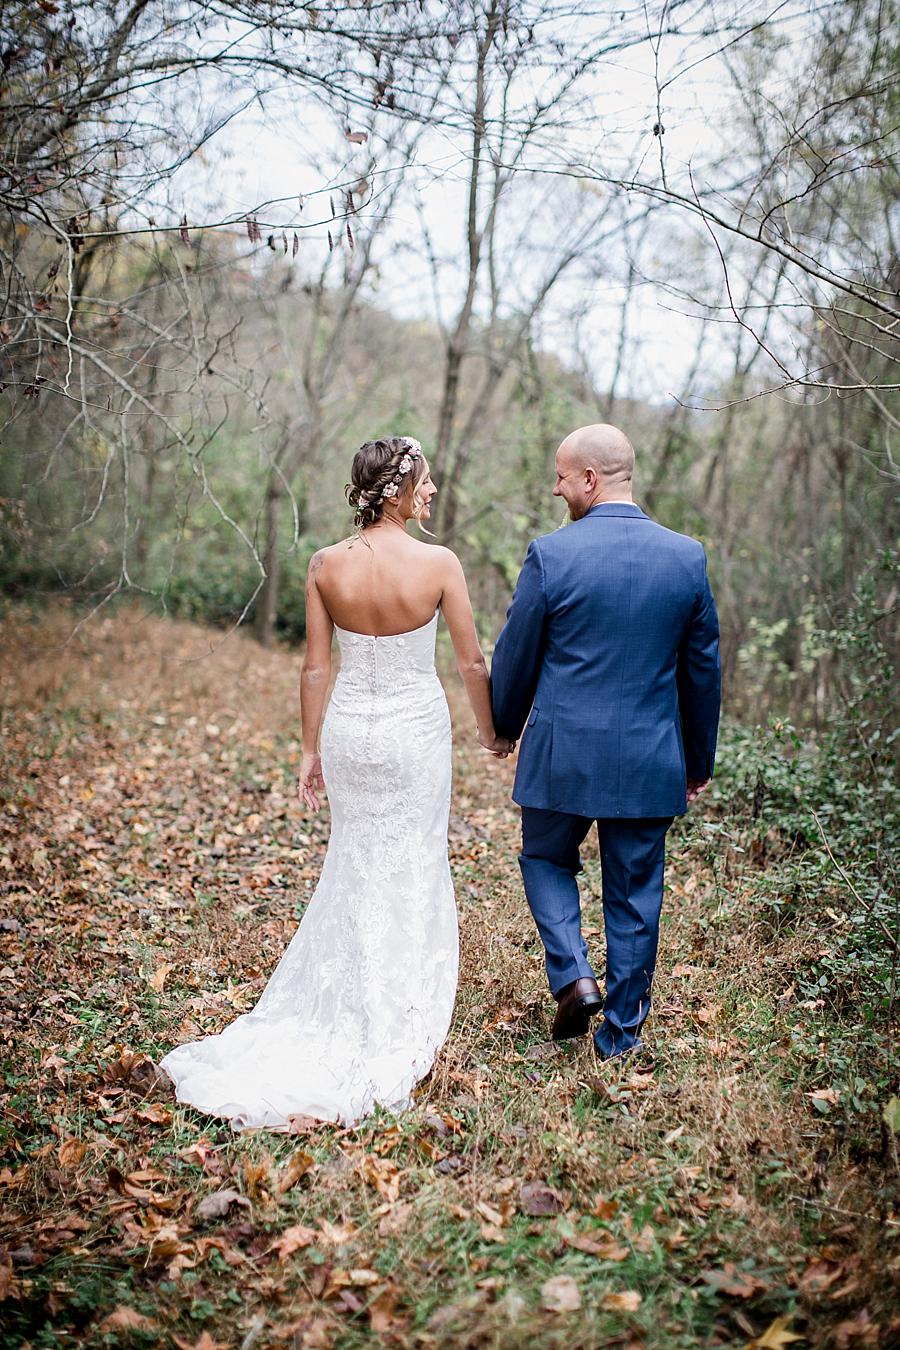 Bride and Groom walking away holding hands at this Alpine Village Wedding Chapel by Knoxville Wedding Photographer, Amanda May Photos.